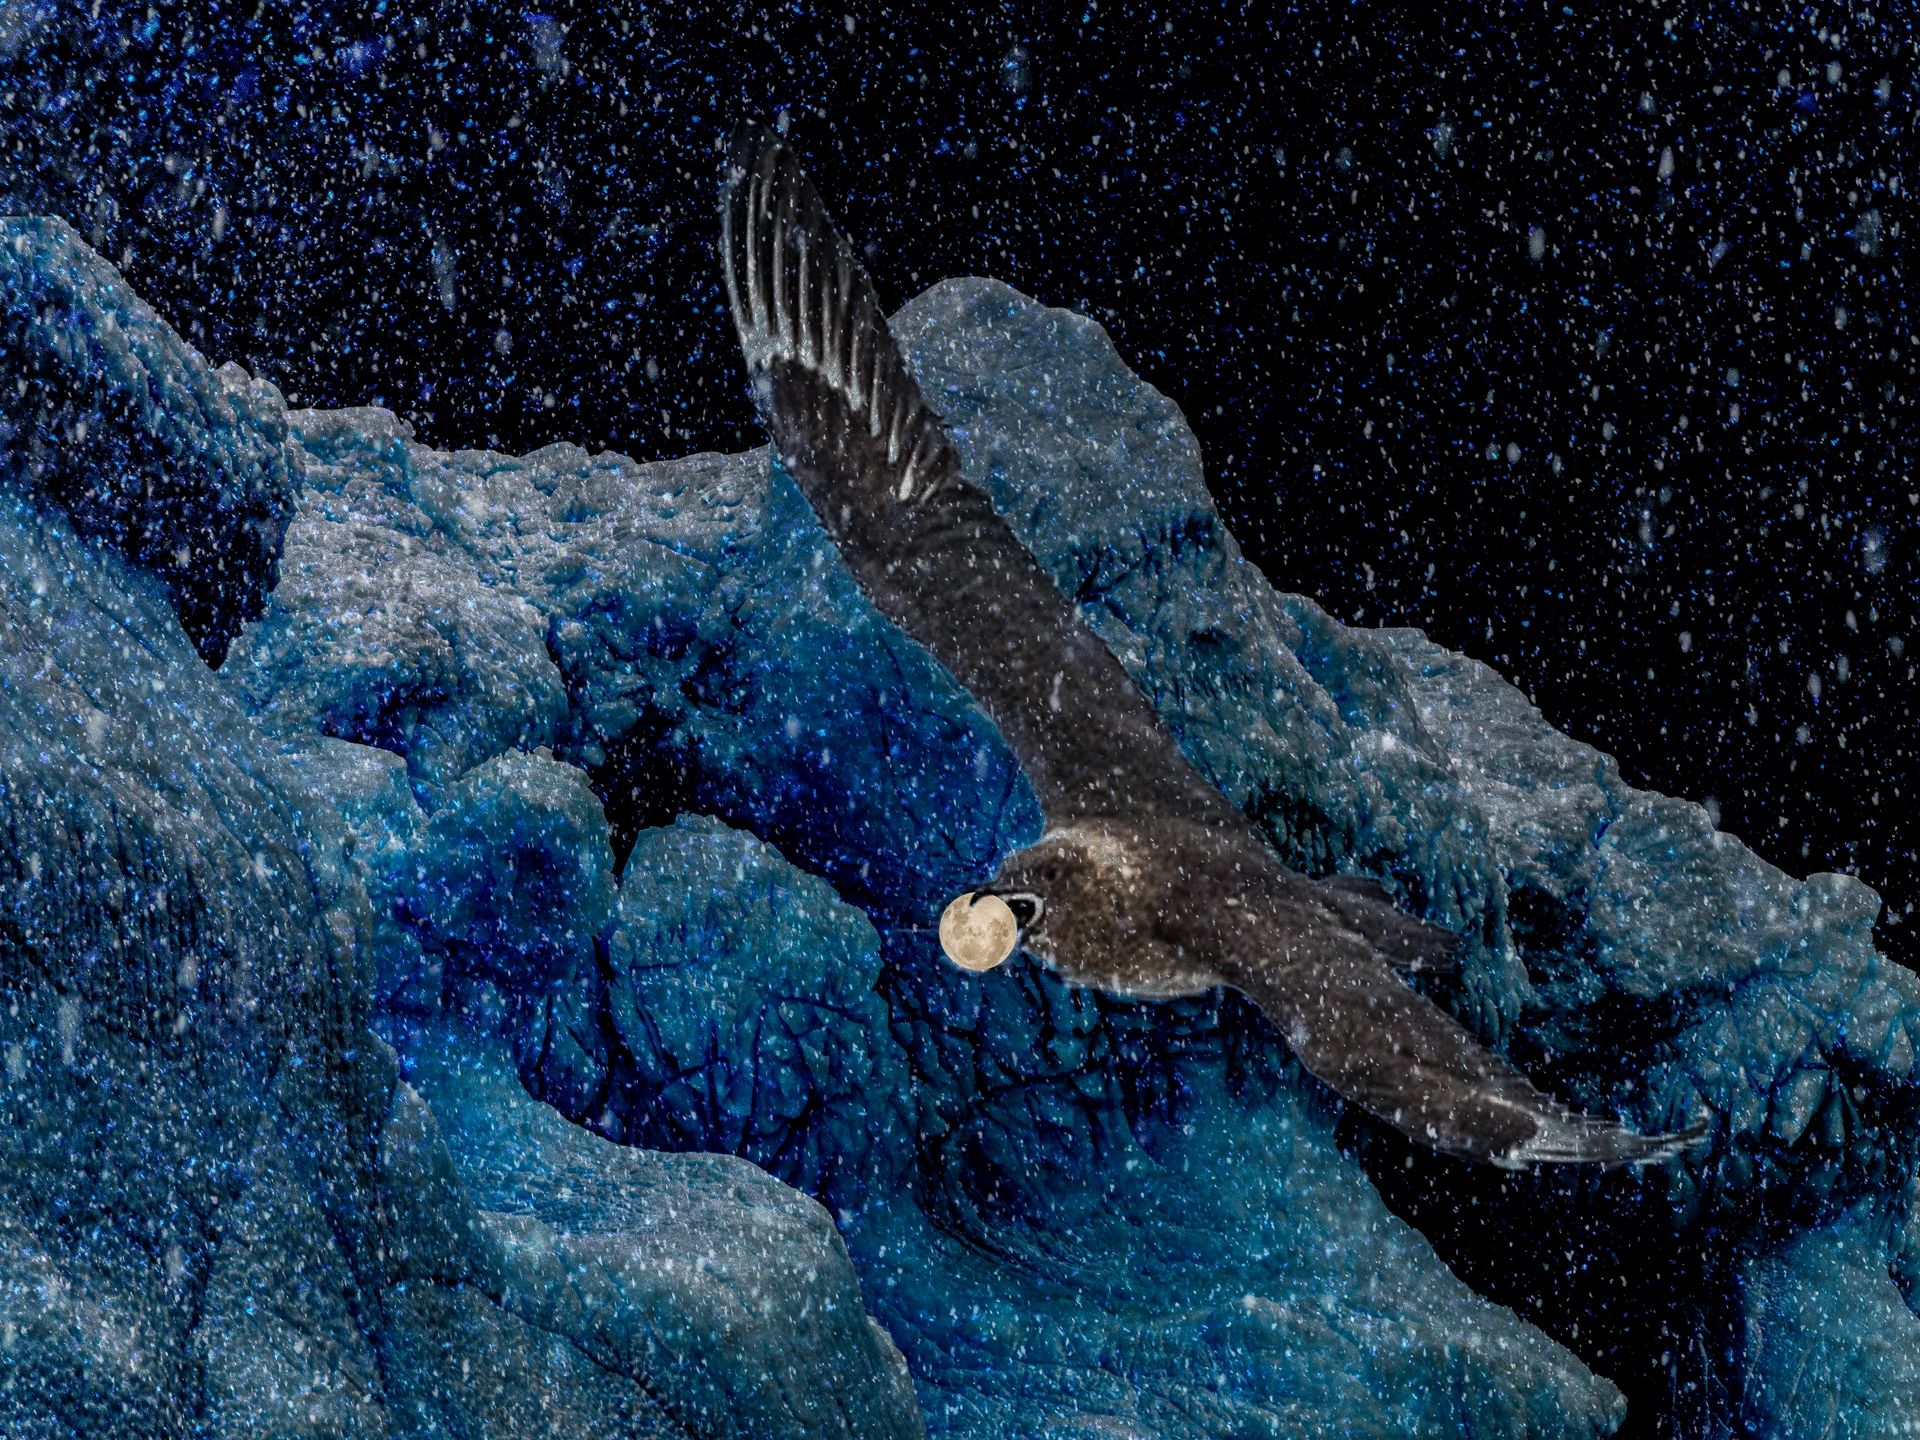 Skua flying with the moon in its beak